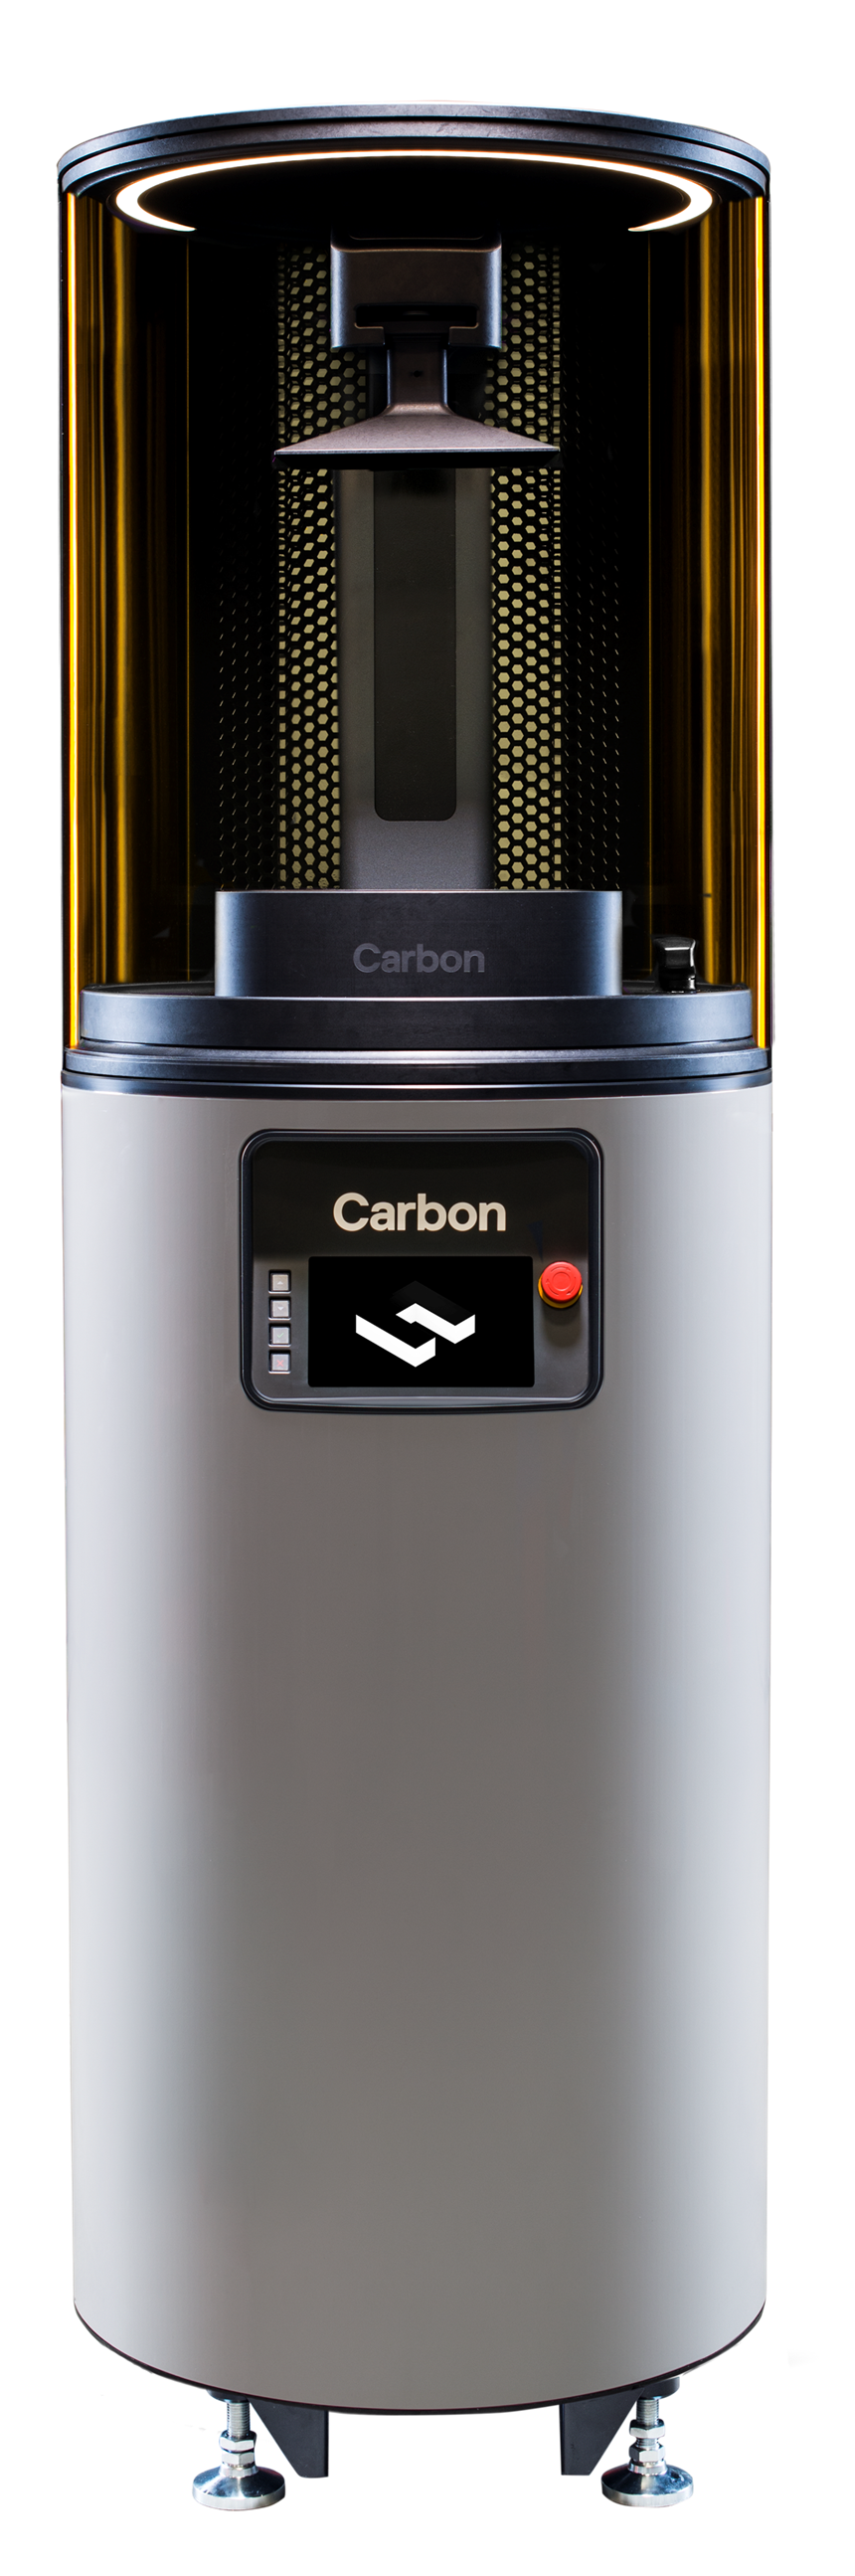 The M2 printer is Carbon’s section generation 3D printer. It allows for larger parts, higher throughput and lower part cost. It features a build volume measuring 7.4 in. × 4.6 in. × 12.8 in. and Carbon's Digital Light Synthesis technology.